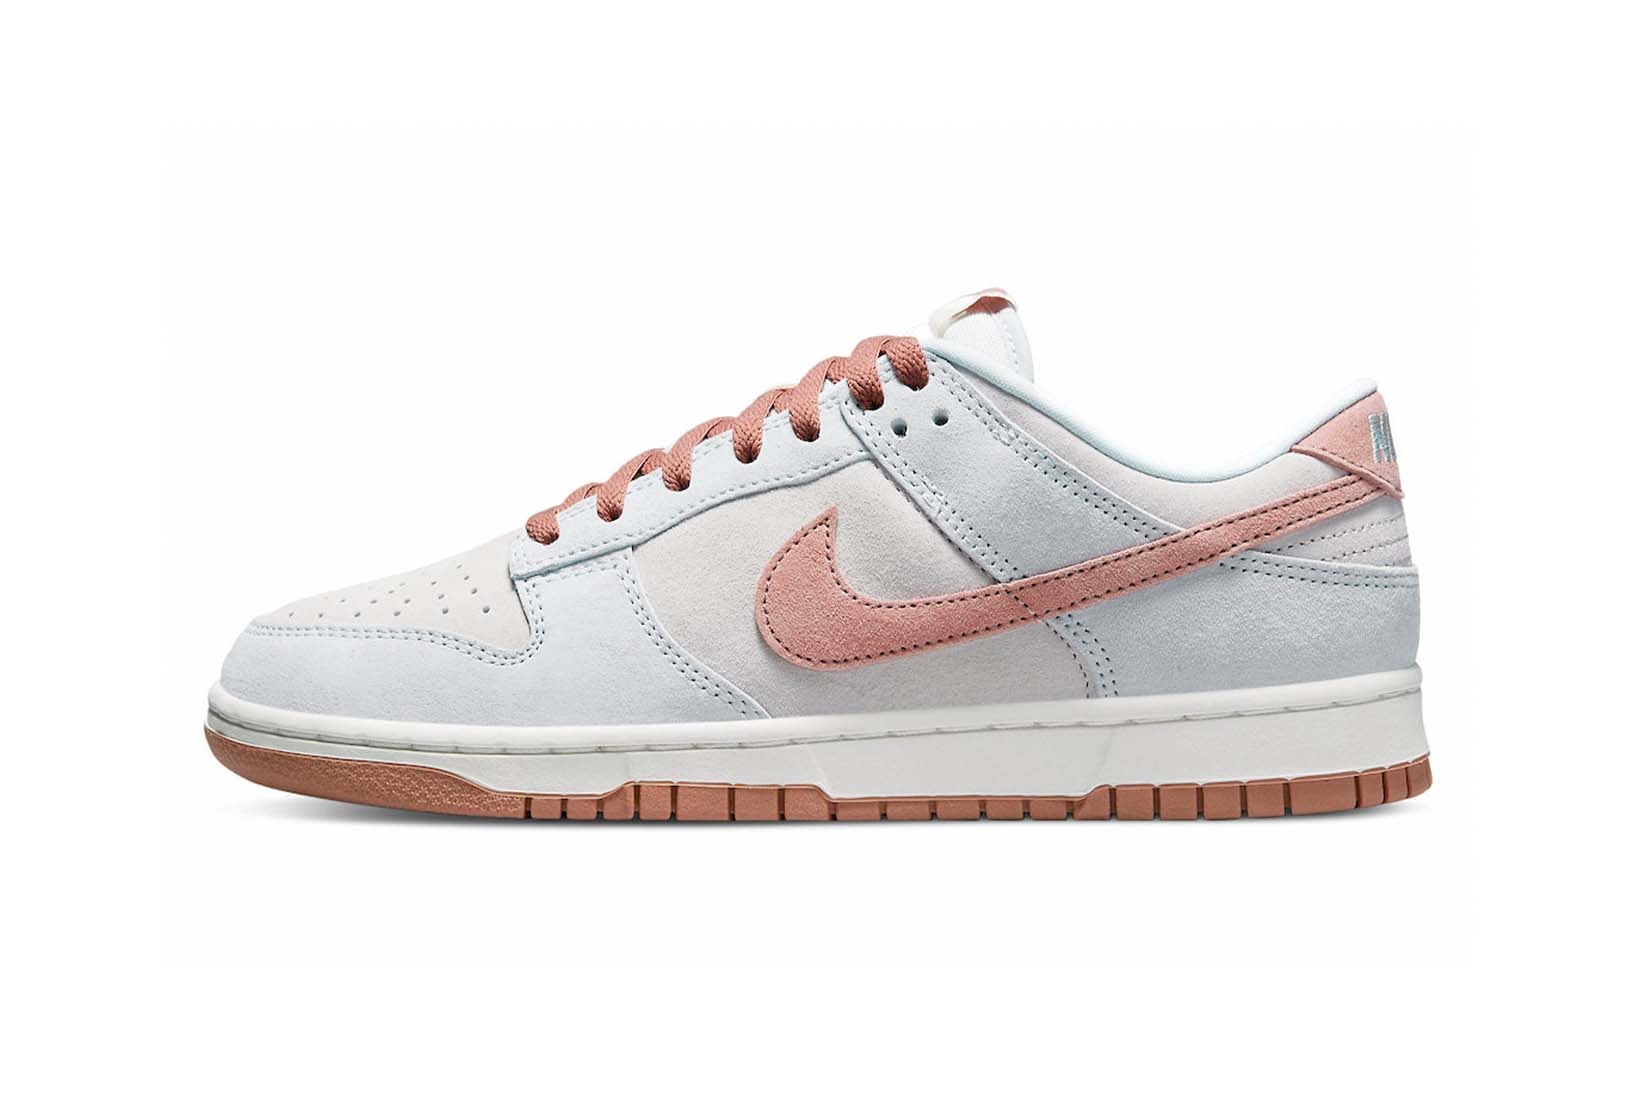 Nike Dunk Low High Fossil Rose Pack Aura Phantom Summit White Price Release Date